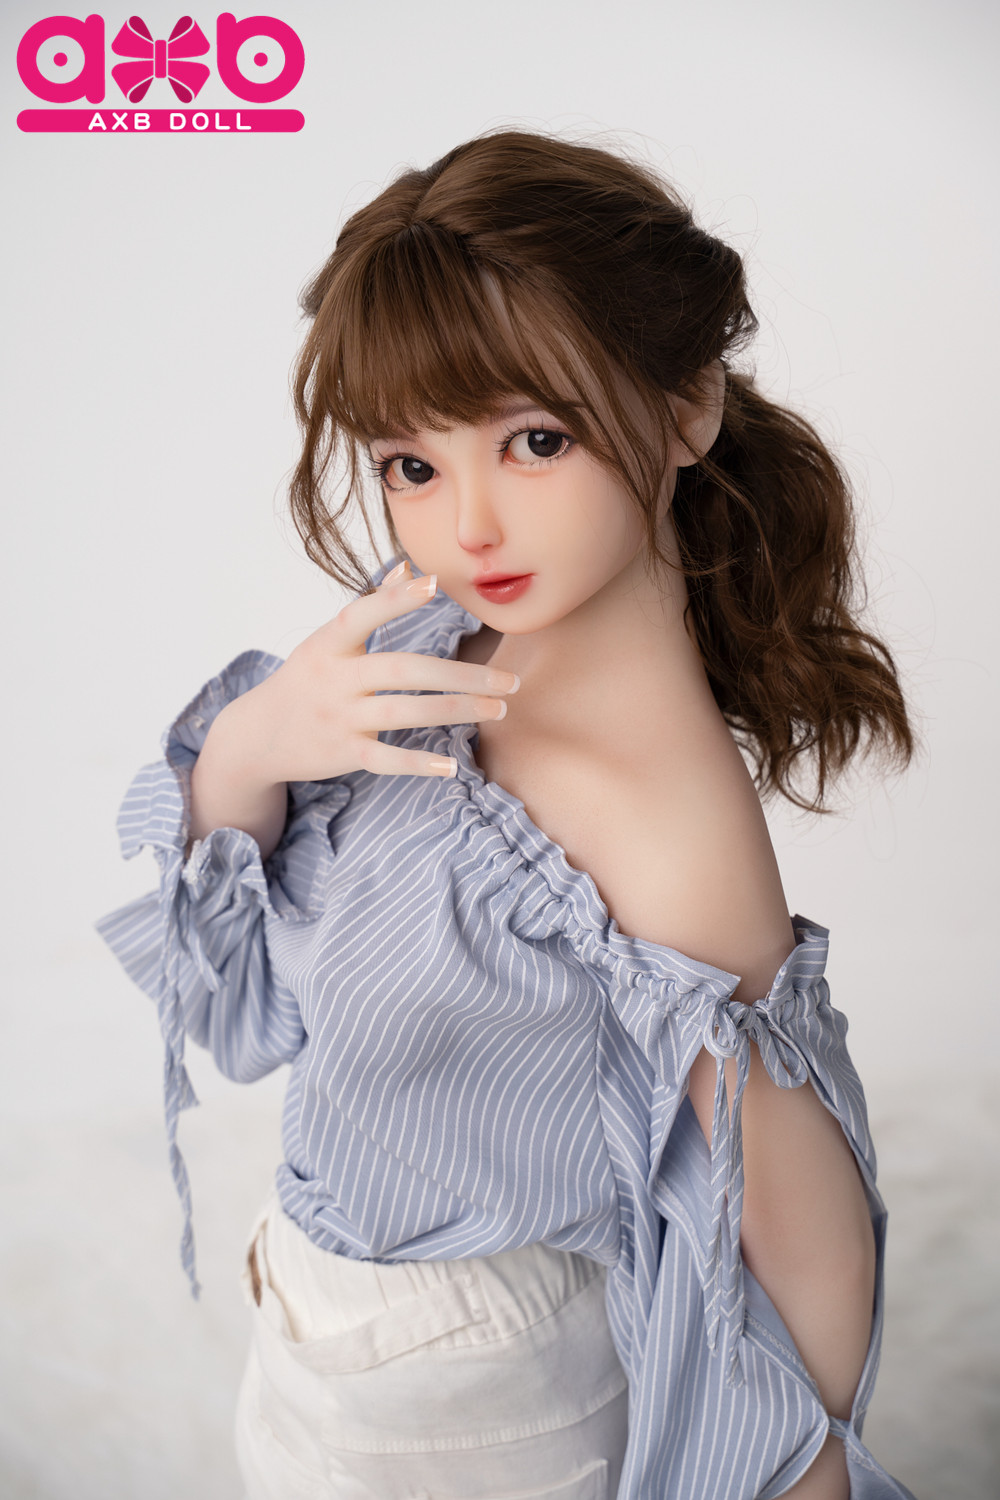 AXBDOLL 140cm A84# TPE Oral Love Doll Life Size Sex Dolls - 画像をクリックして閉じます